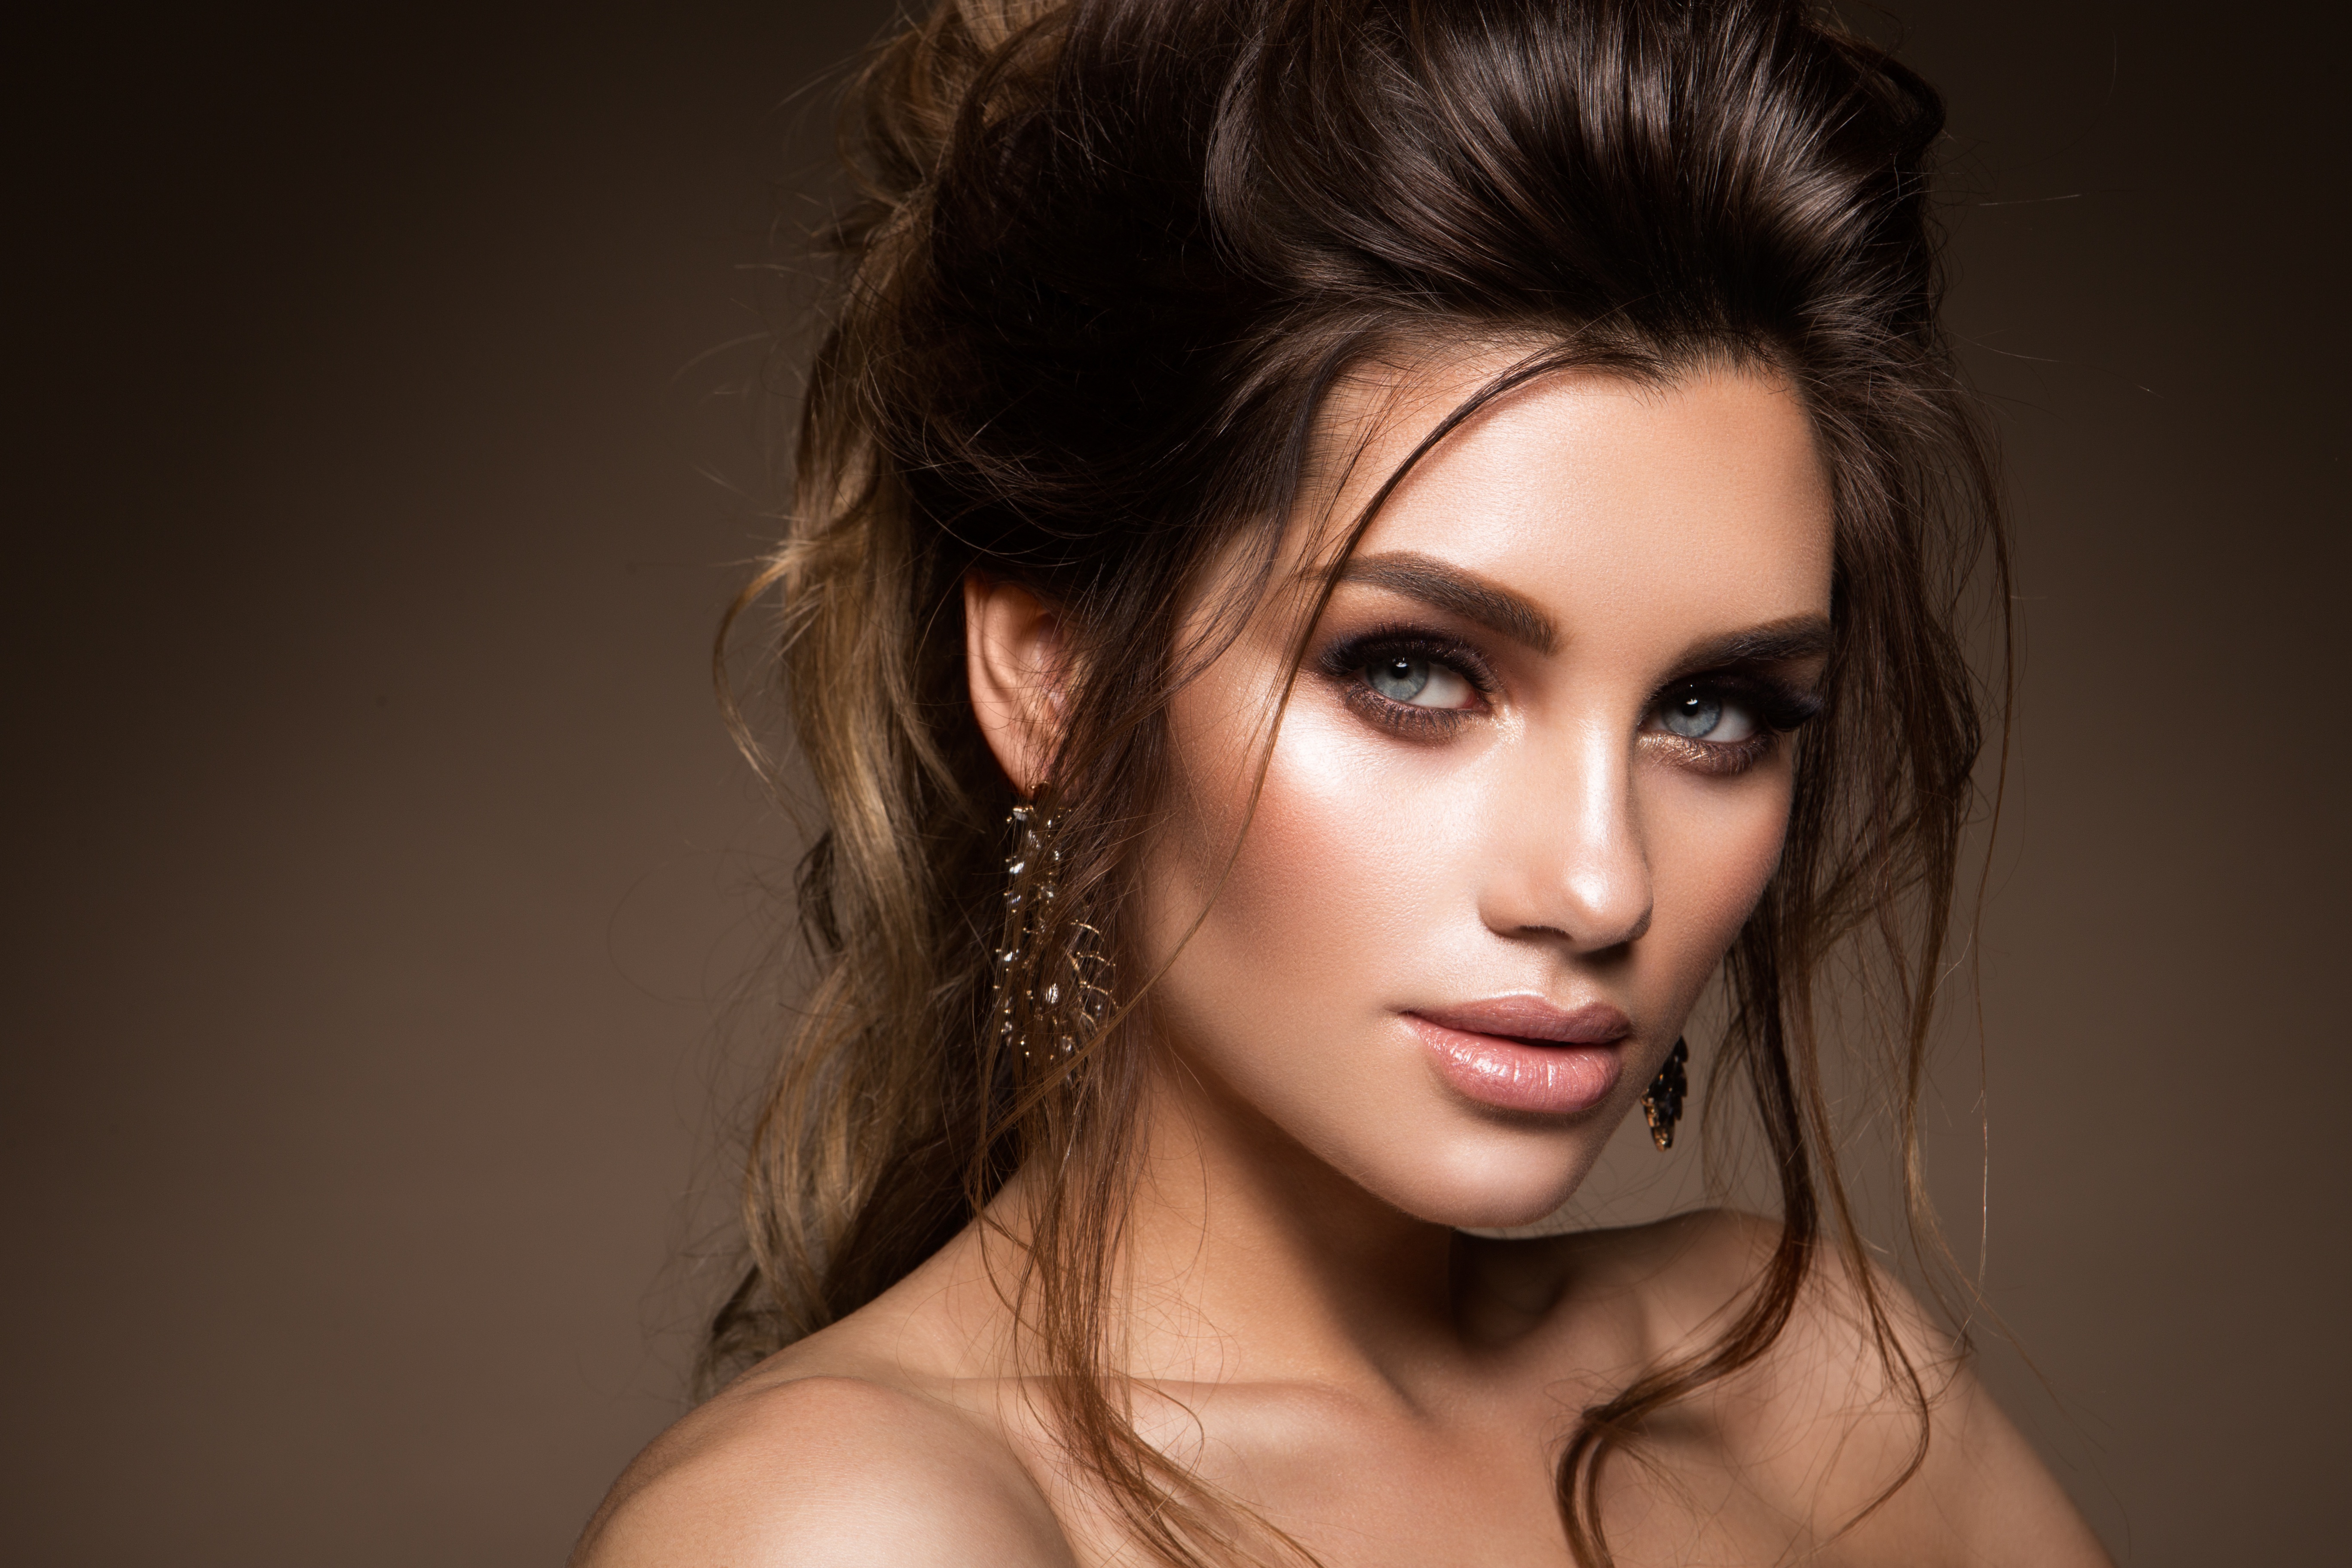 A beautiful brown-haired woman in chic makeup